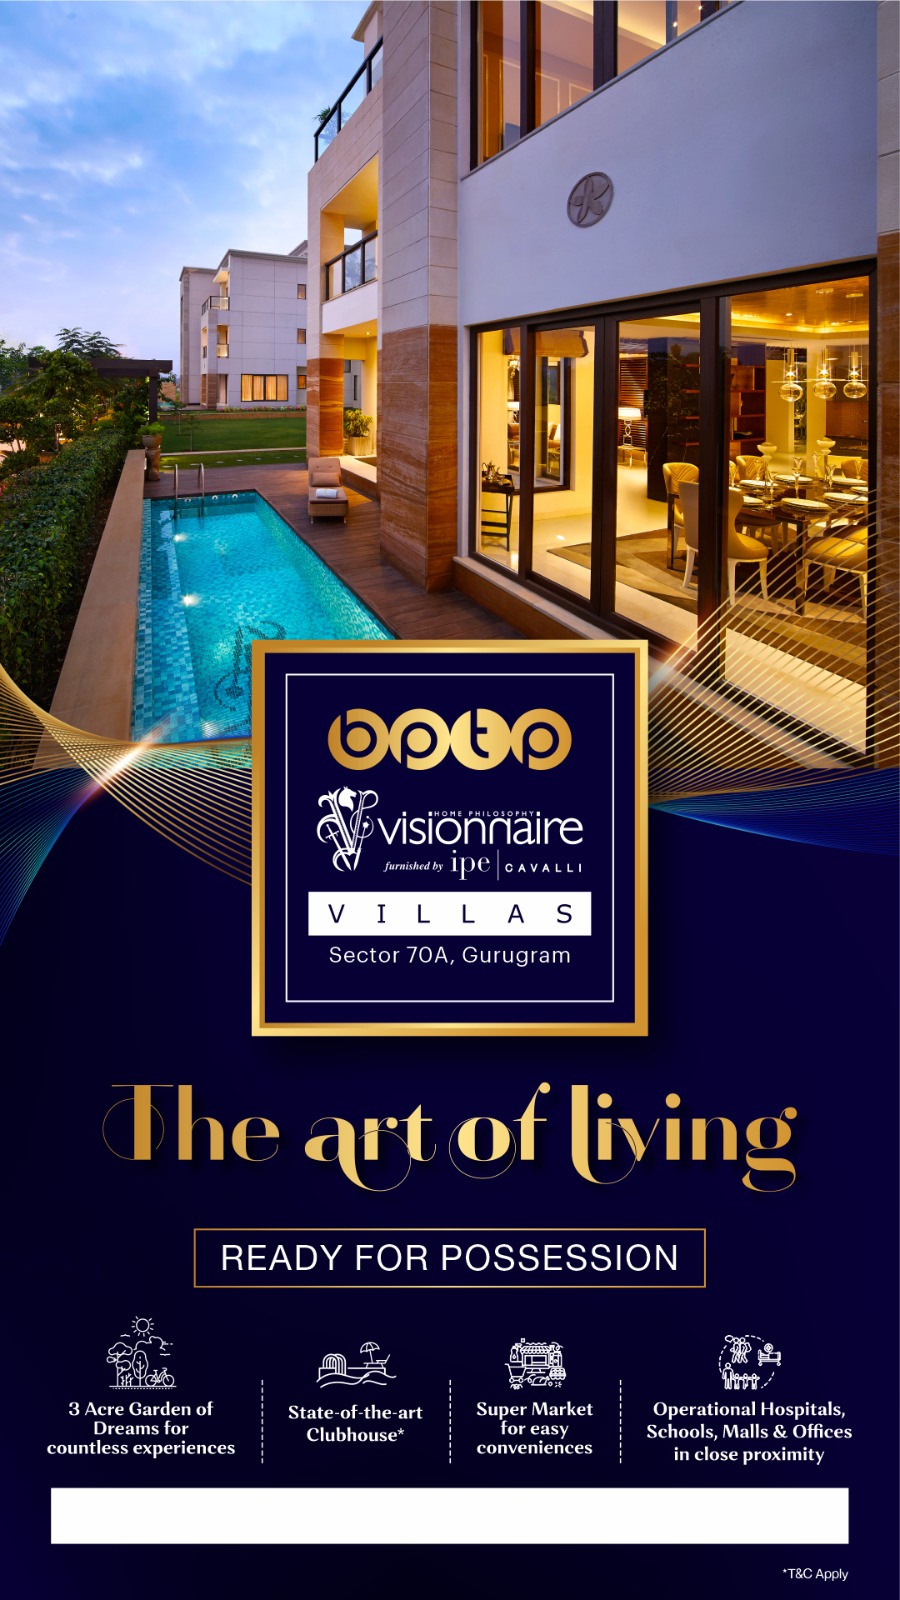 Ready for possession at BPTP Visionnaire Luxe Villas, Gurgaon Update